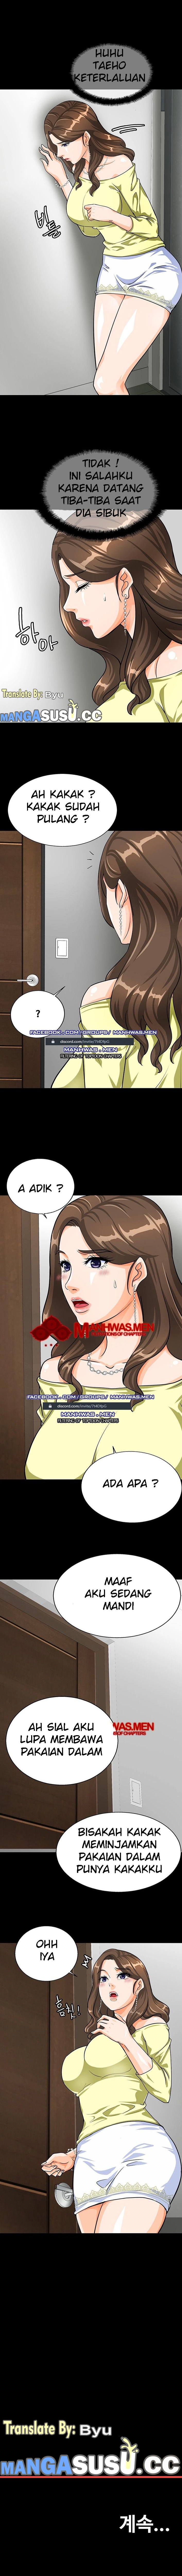 Baca I Live With Sister-in-Law Chapter 2  - GudangKomik